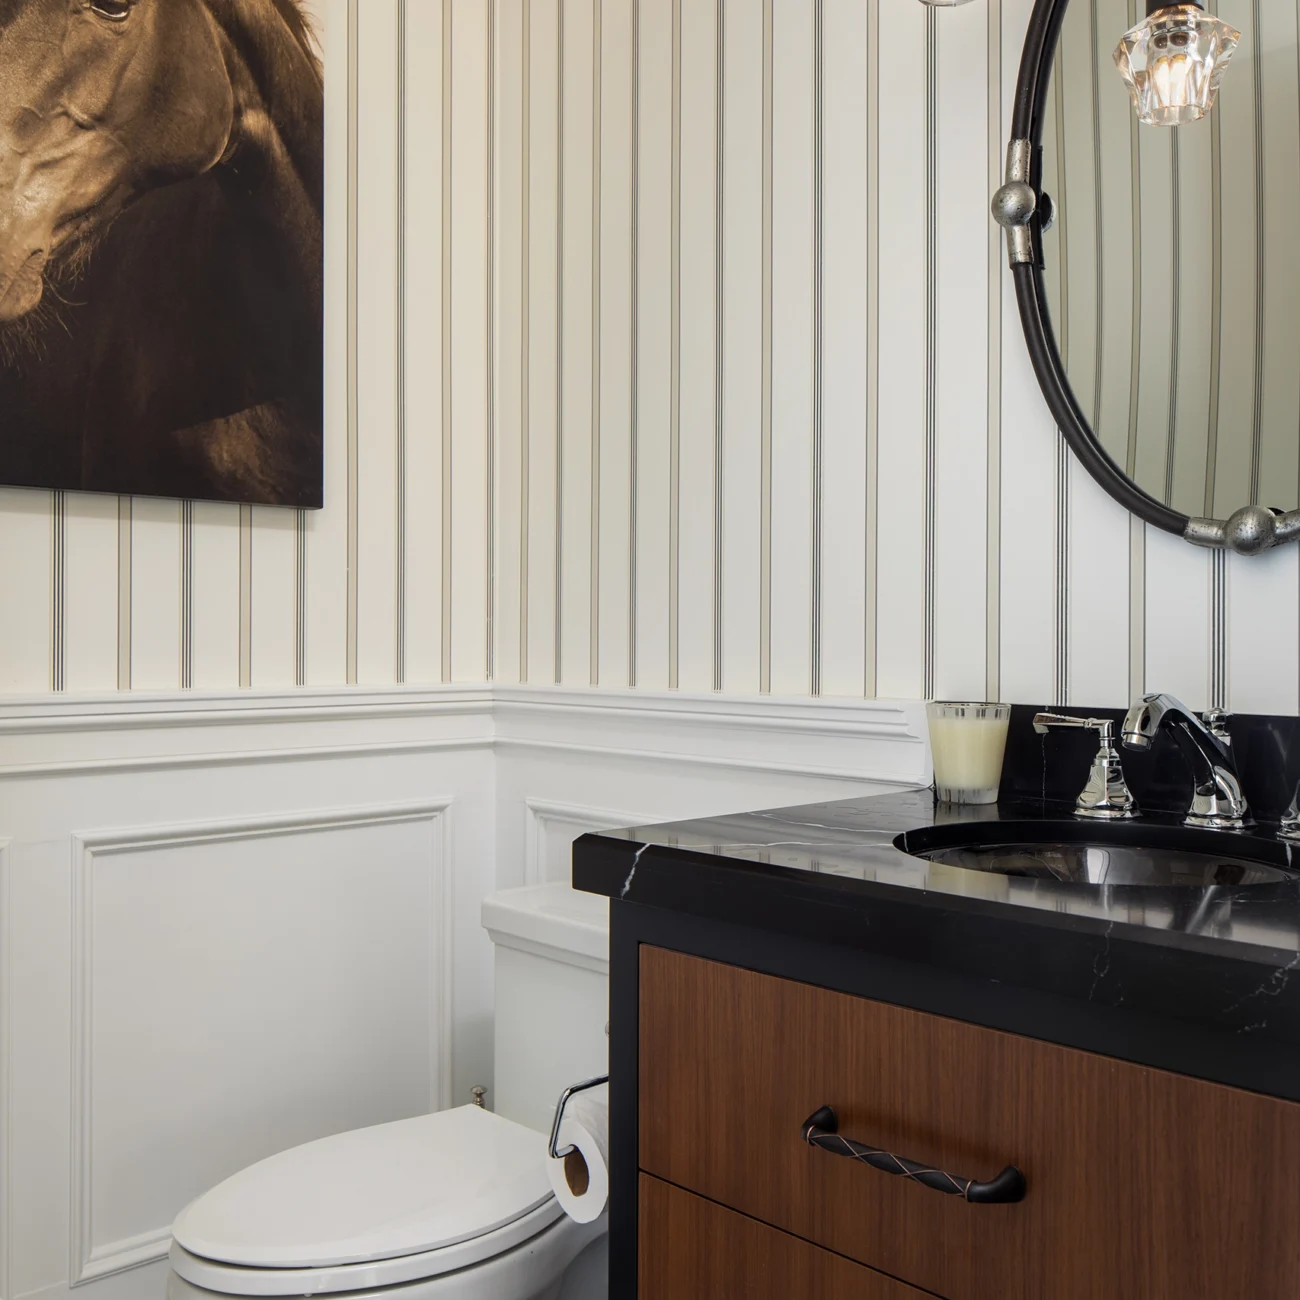 Christine Vroom Interiors Strawberry Lane | Traditional equestrian themed bathroom with black sink and wainscoting